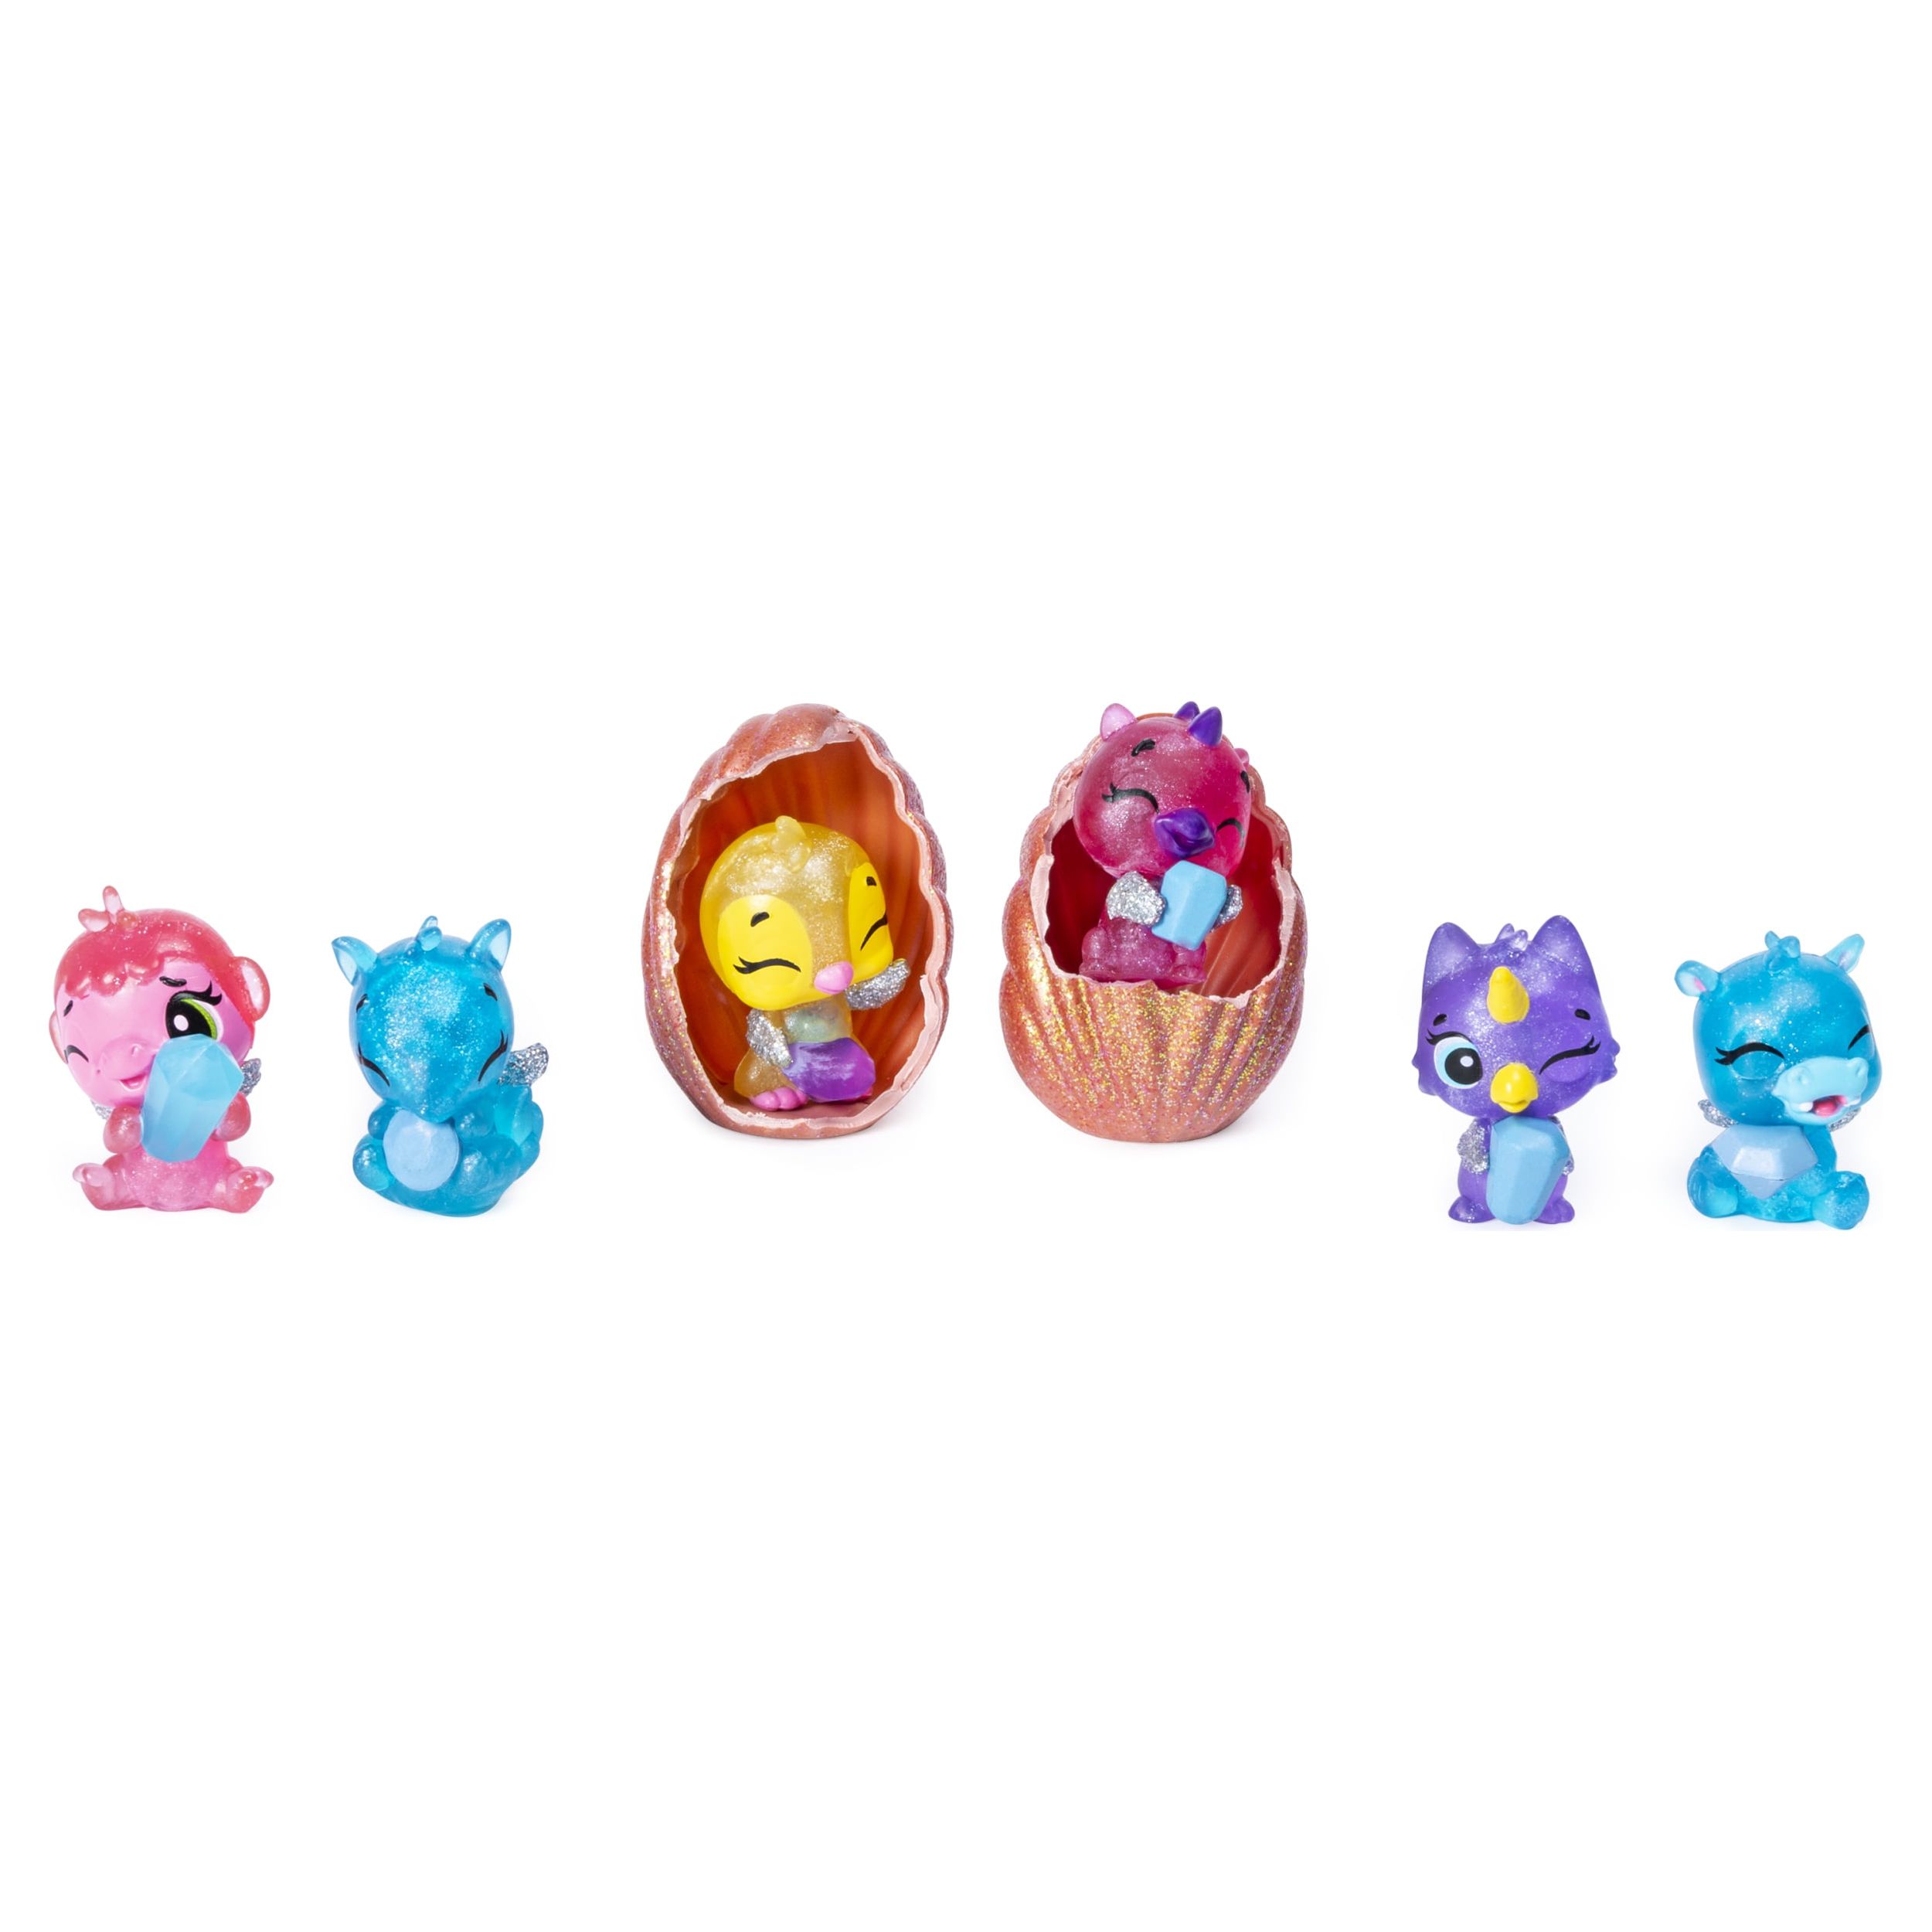 Hatchimals CollEGGtibles, Mermal Magic 6 Pack Shell Carrying Case with Season 5 Hatchimals CollEGGtibles, for Kids Aged 5 and Up (Color May Vary) - image 8 of 8